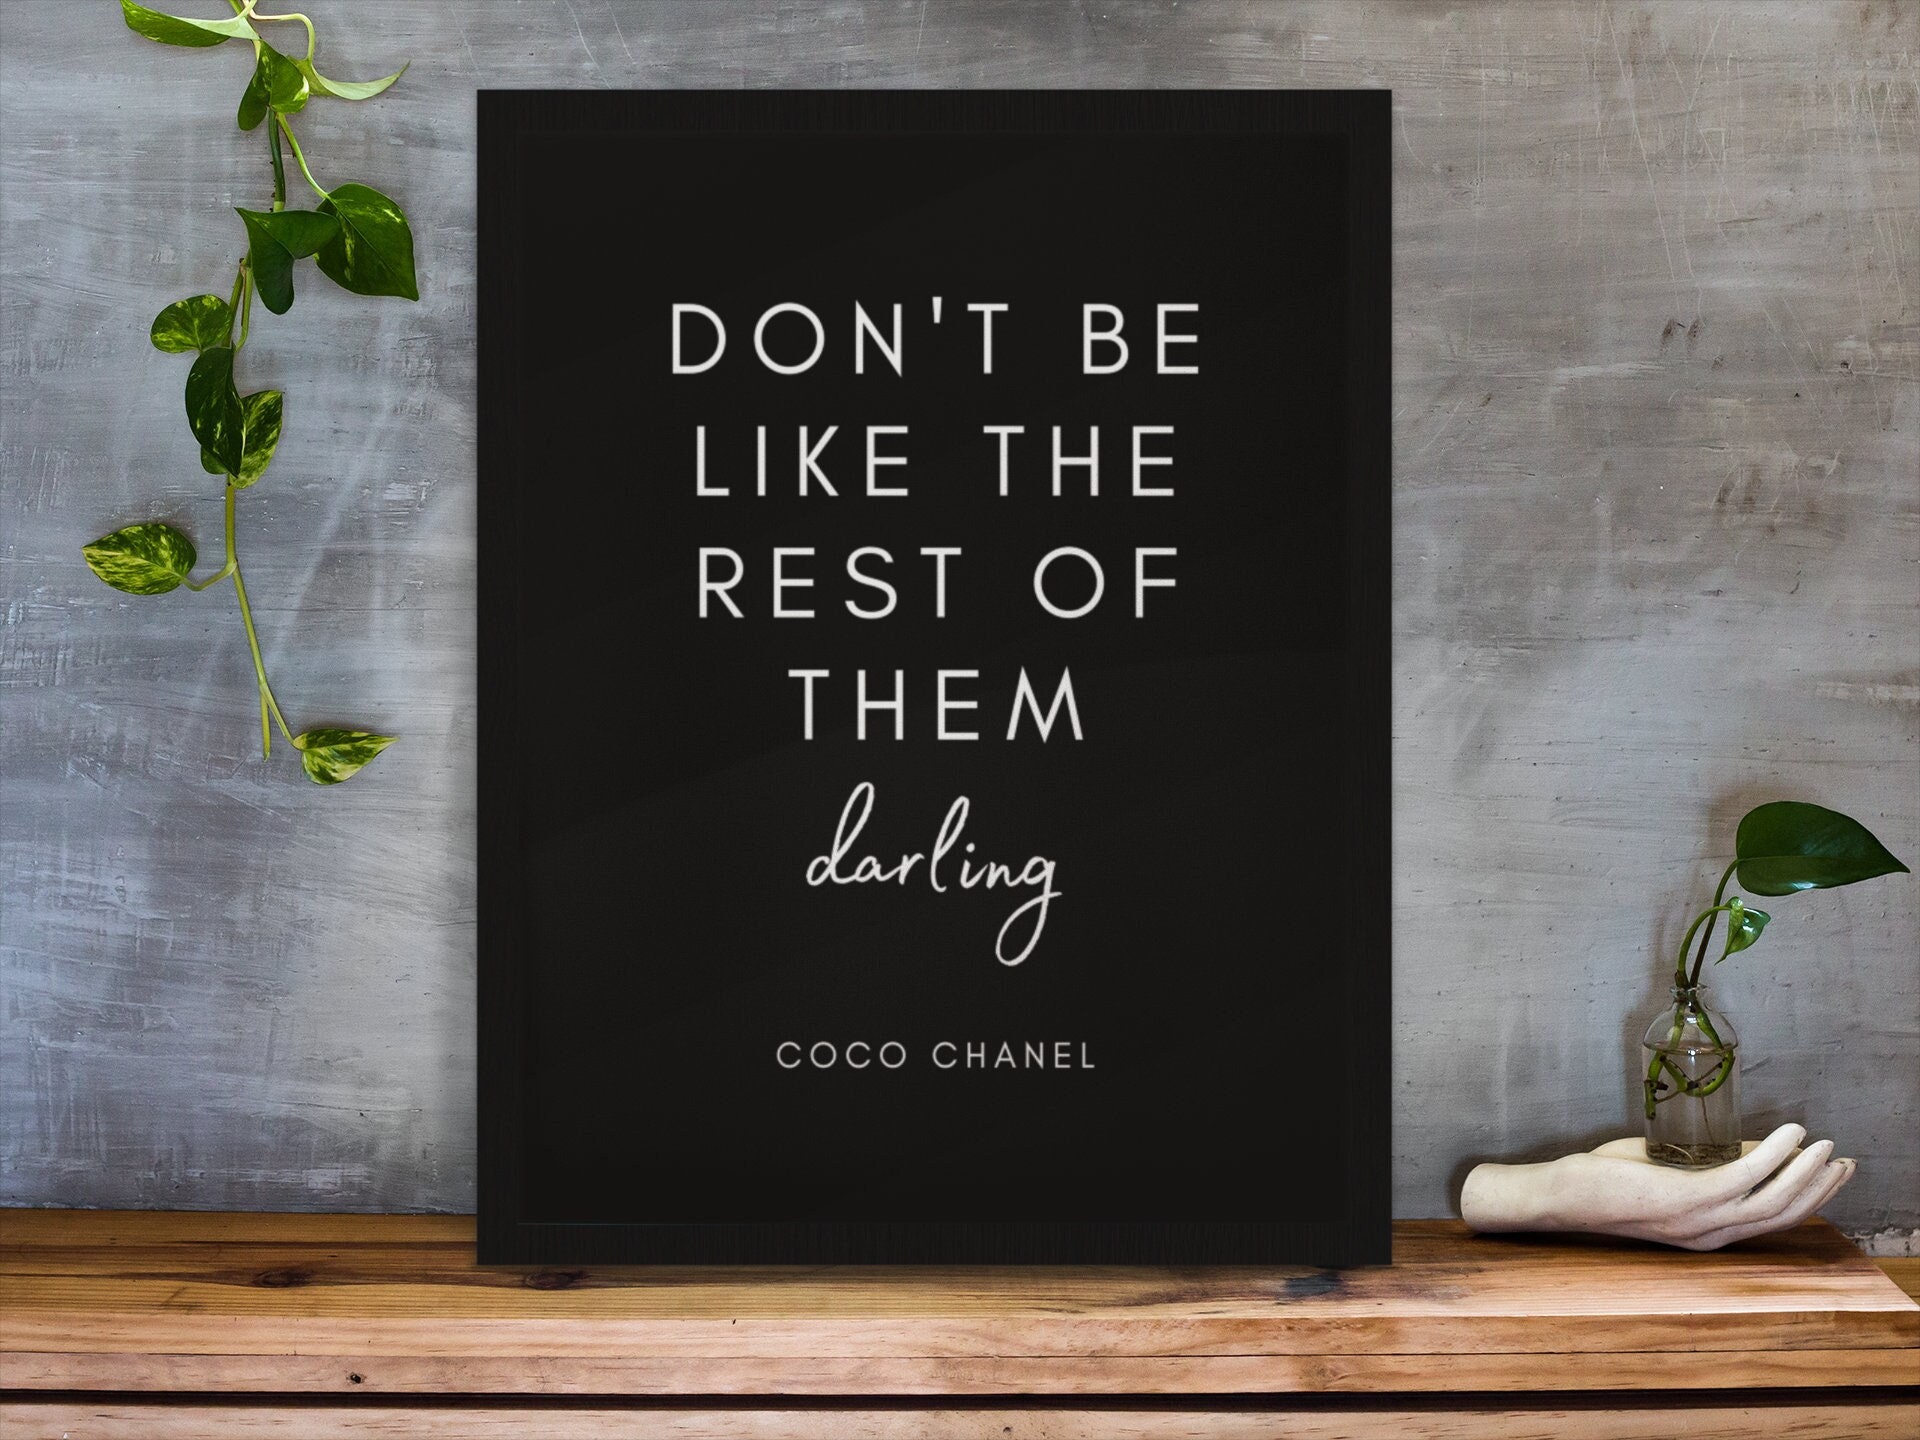 Coco Chanel Quotes Wall Art for Sale